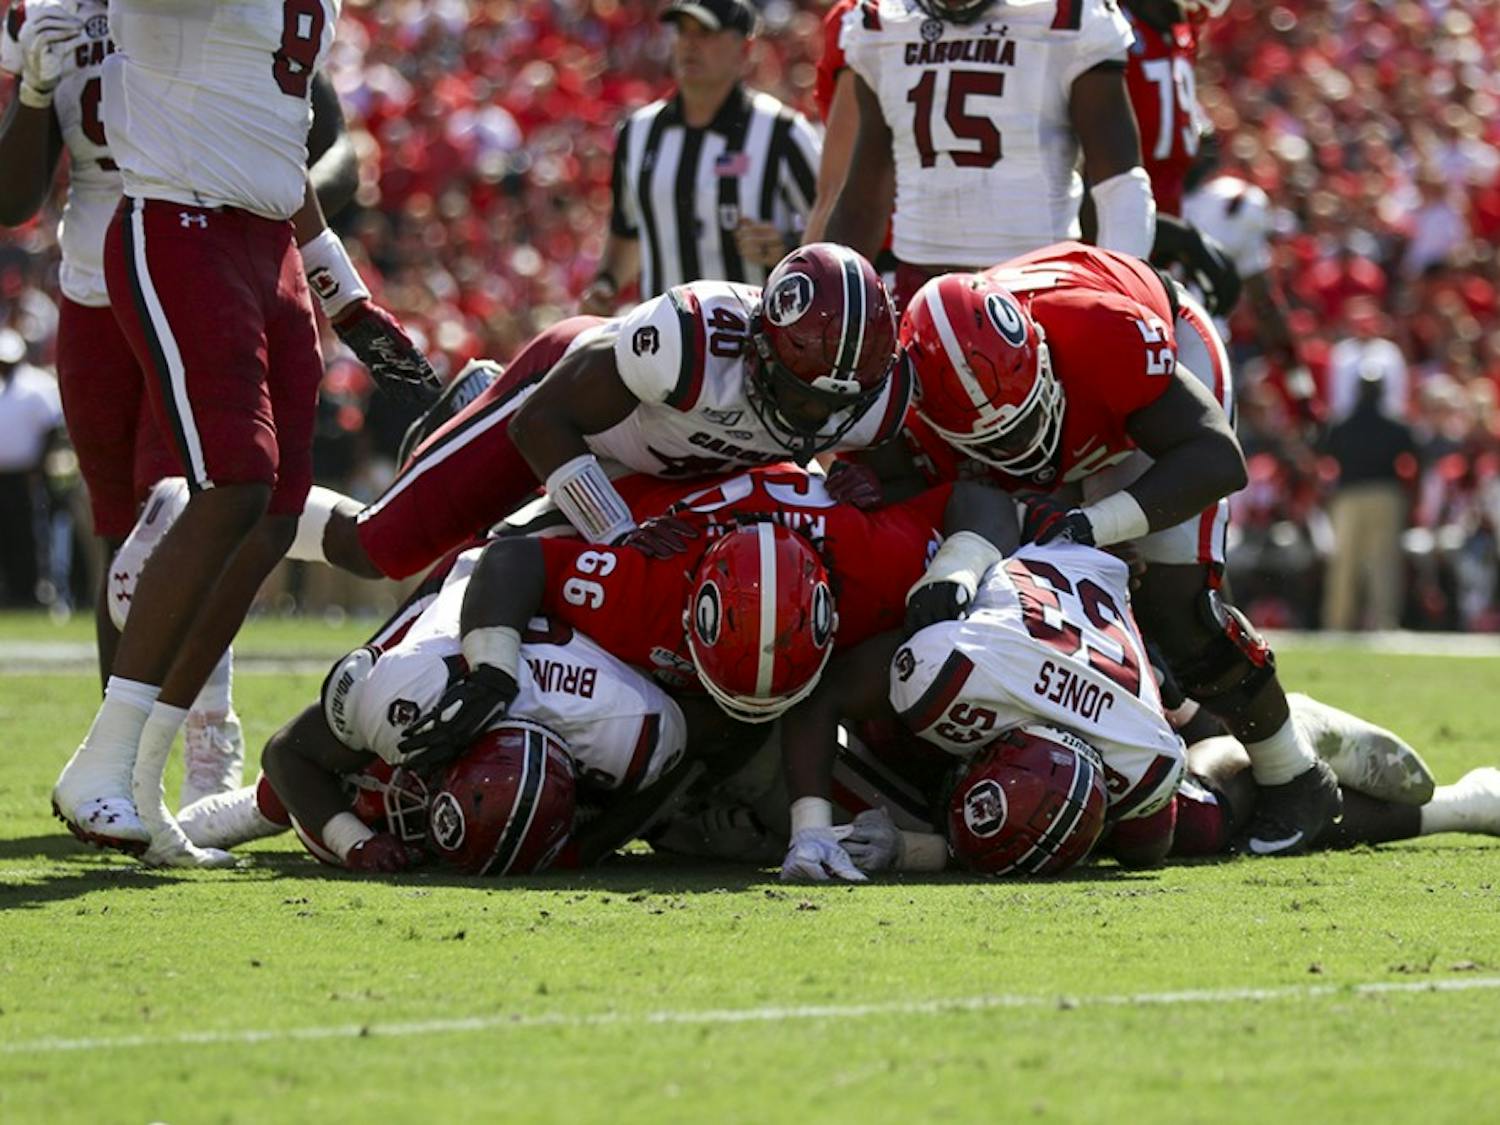 The Gamecocks recover a fumble during the UGA game Saturday.